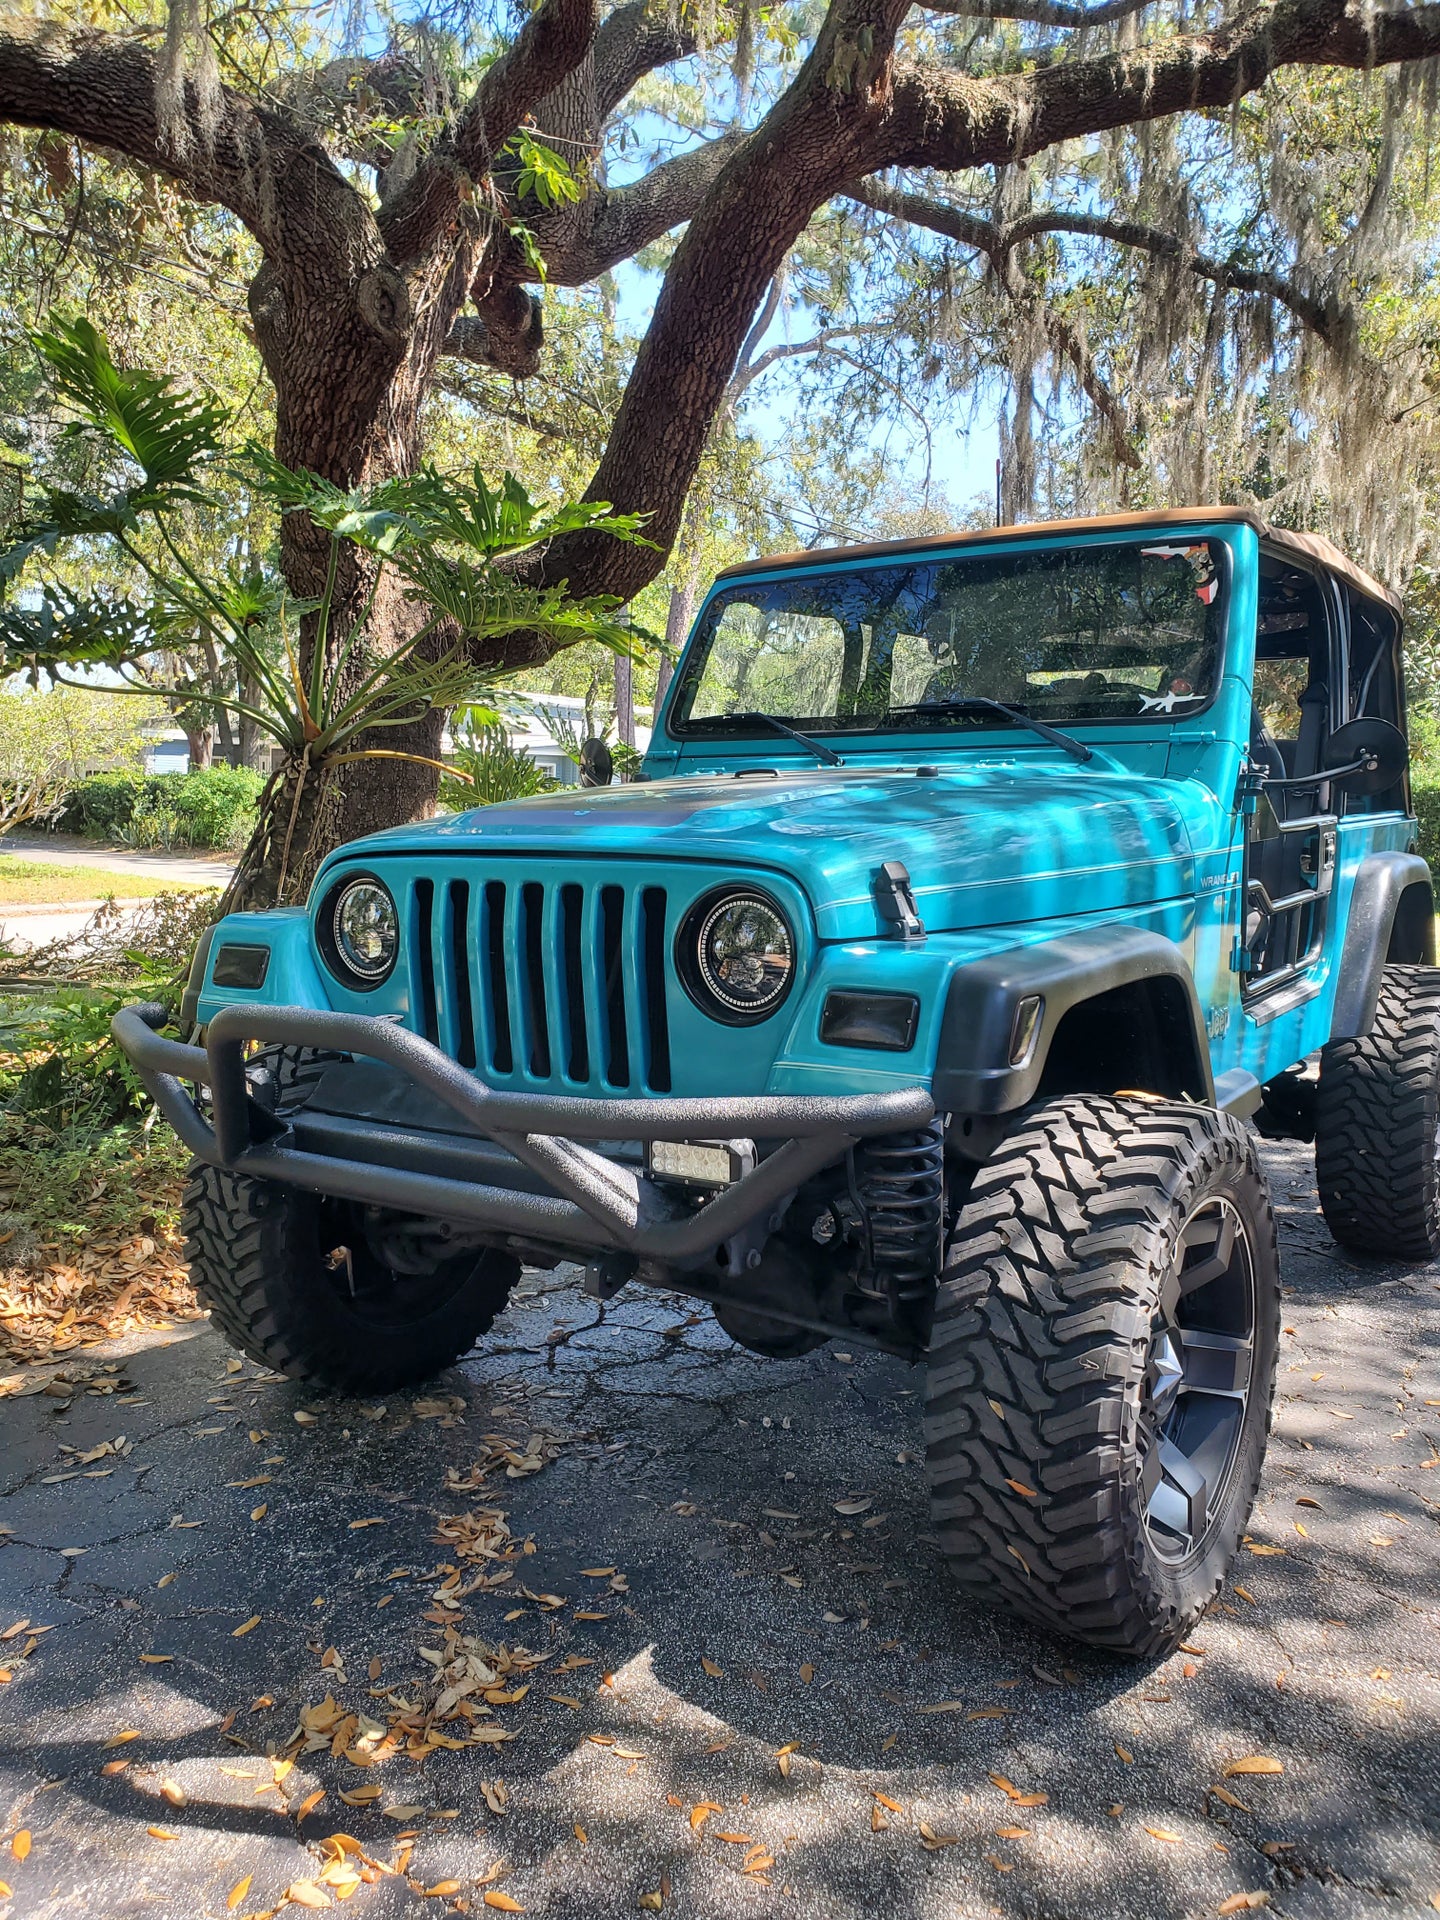 TEAL (bright jade satin glow) TJ OWNERS UNITE!!!!!!! | Page 5 | Jeep  Wrangler Forum